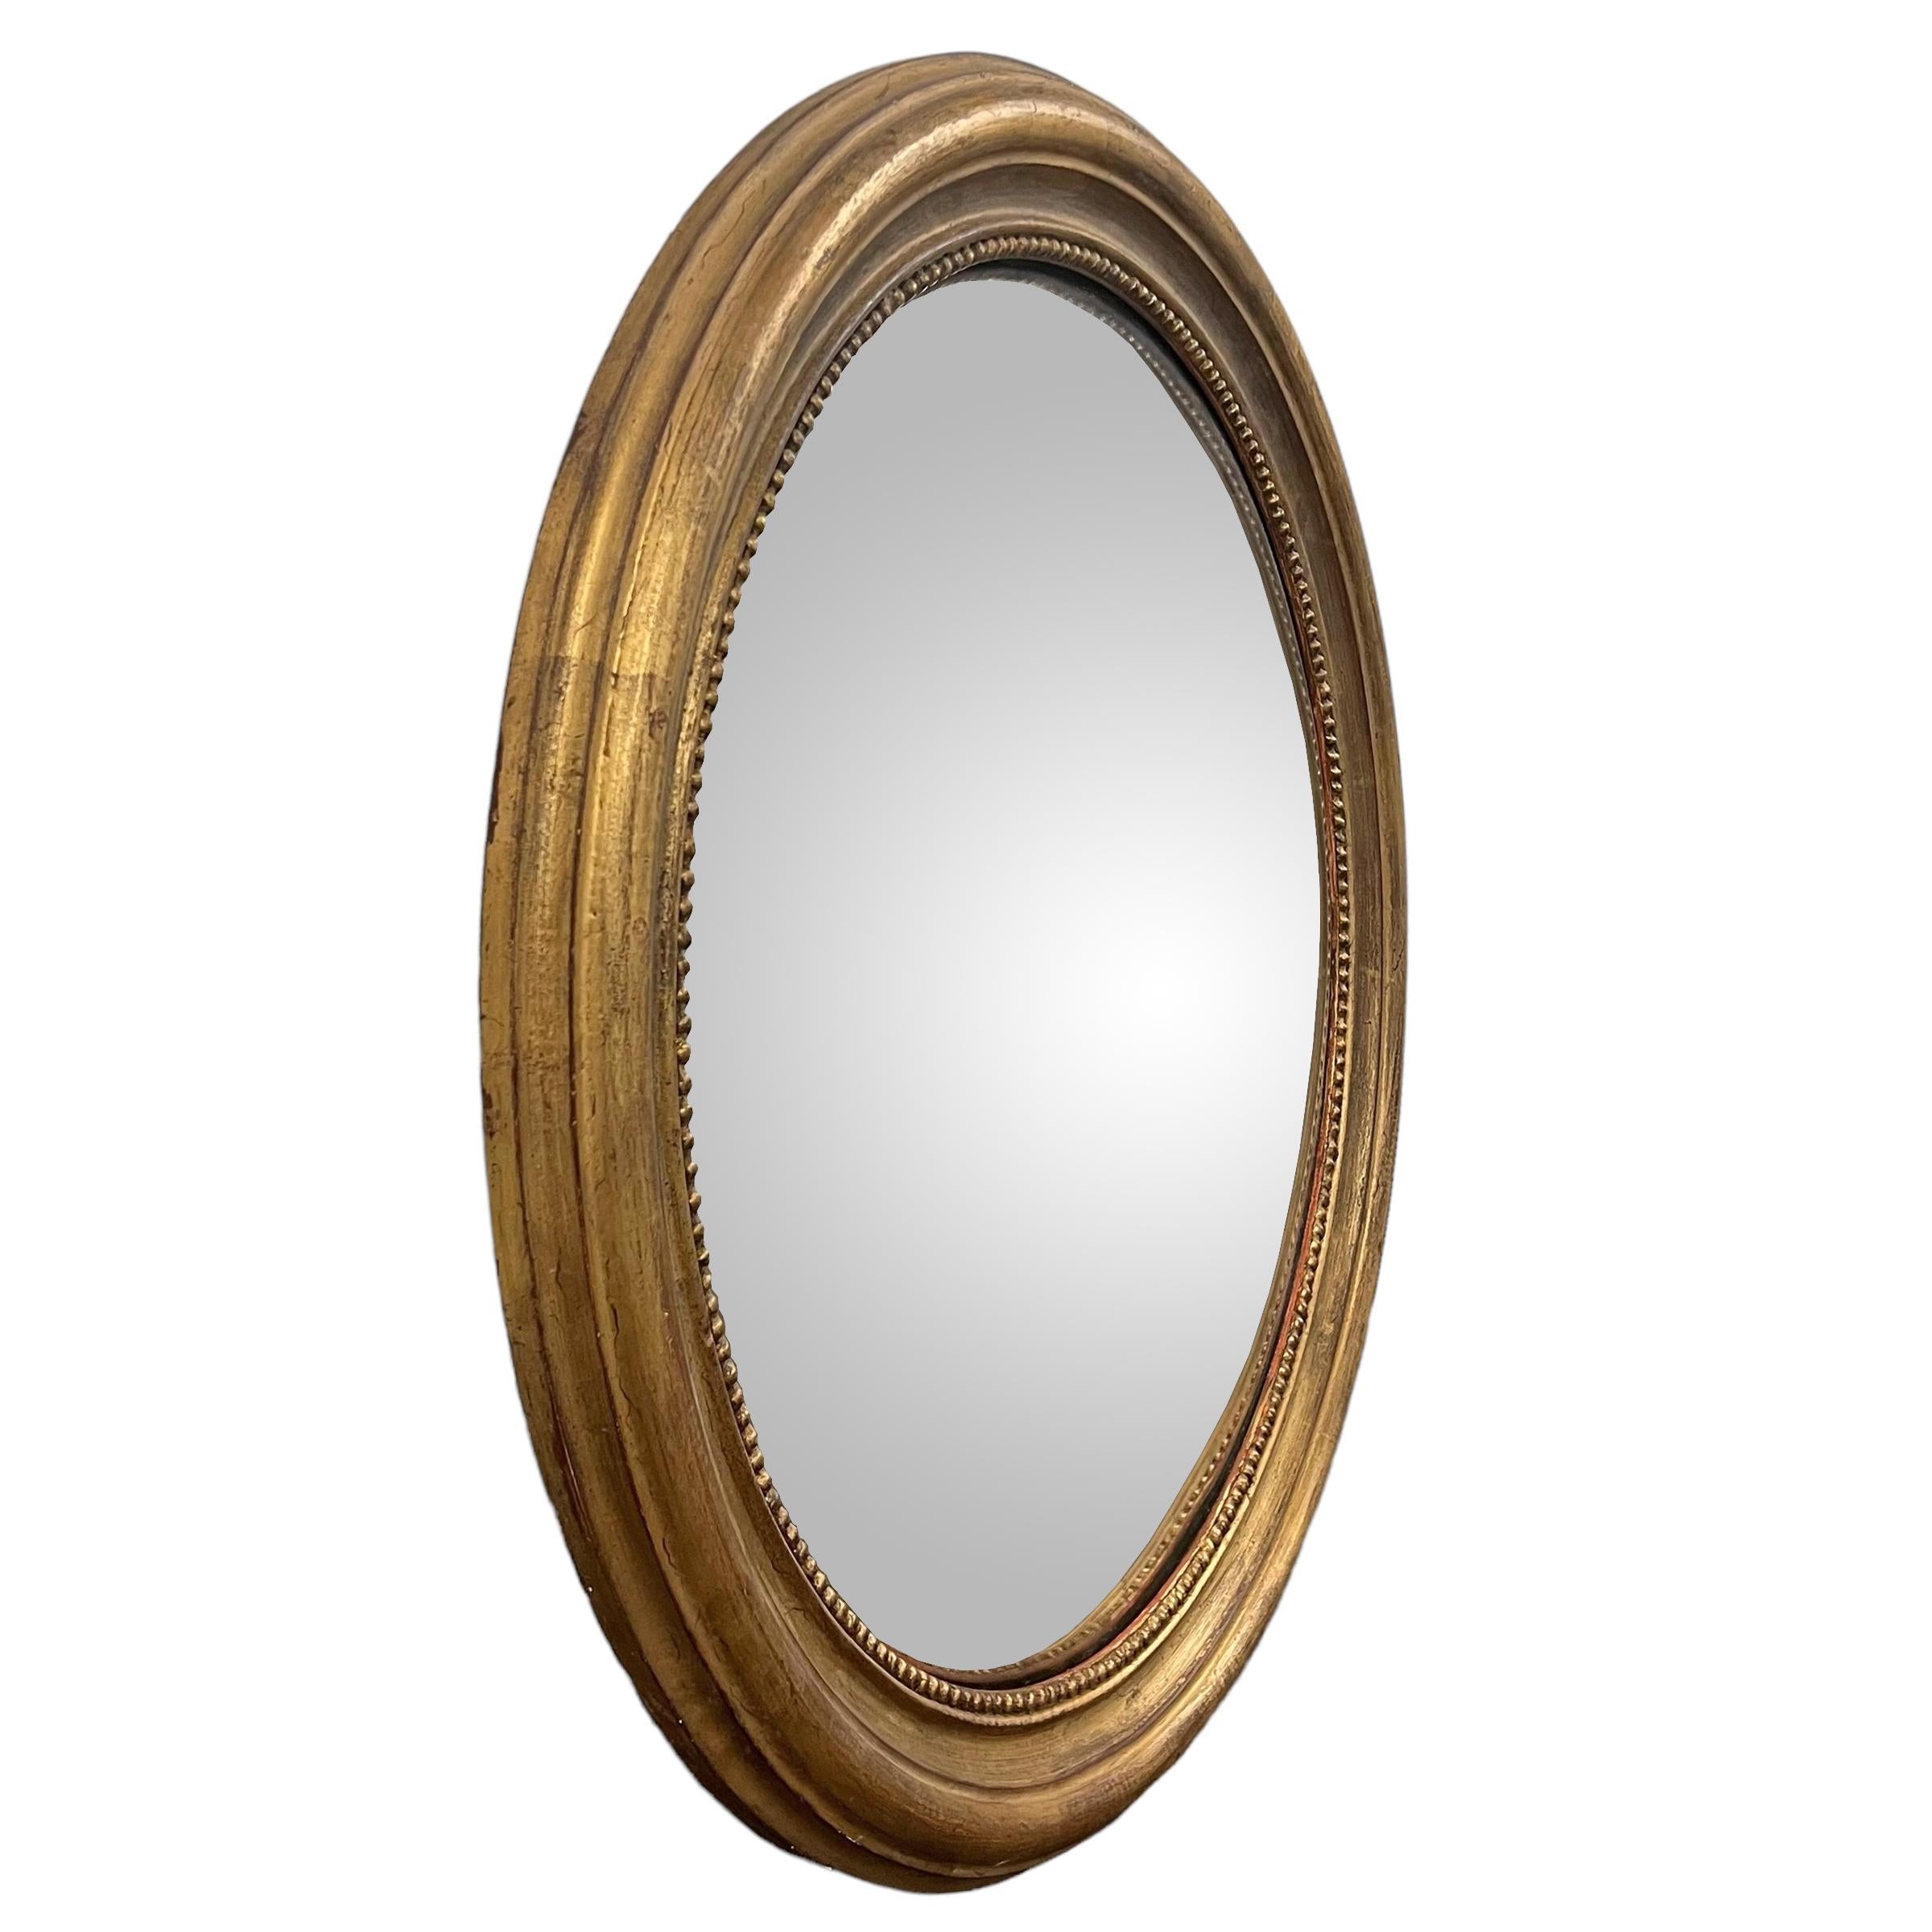 Neoclassical Mid-20th Century Giltwood Framed Convex Mirror